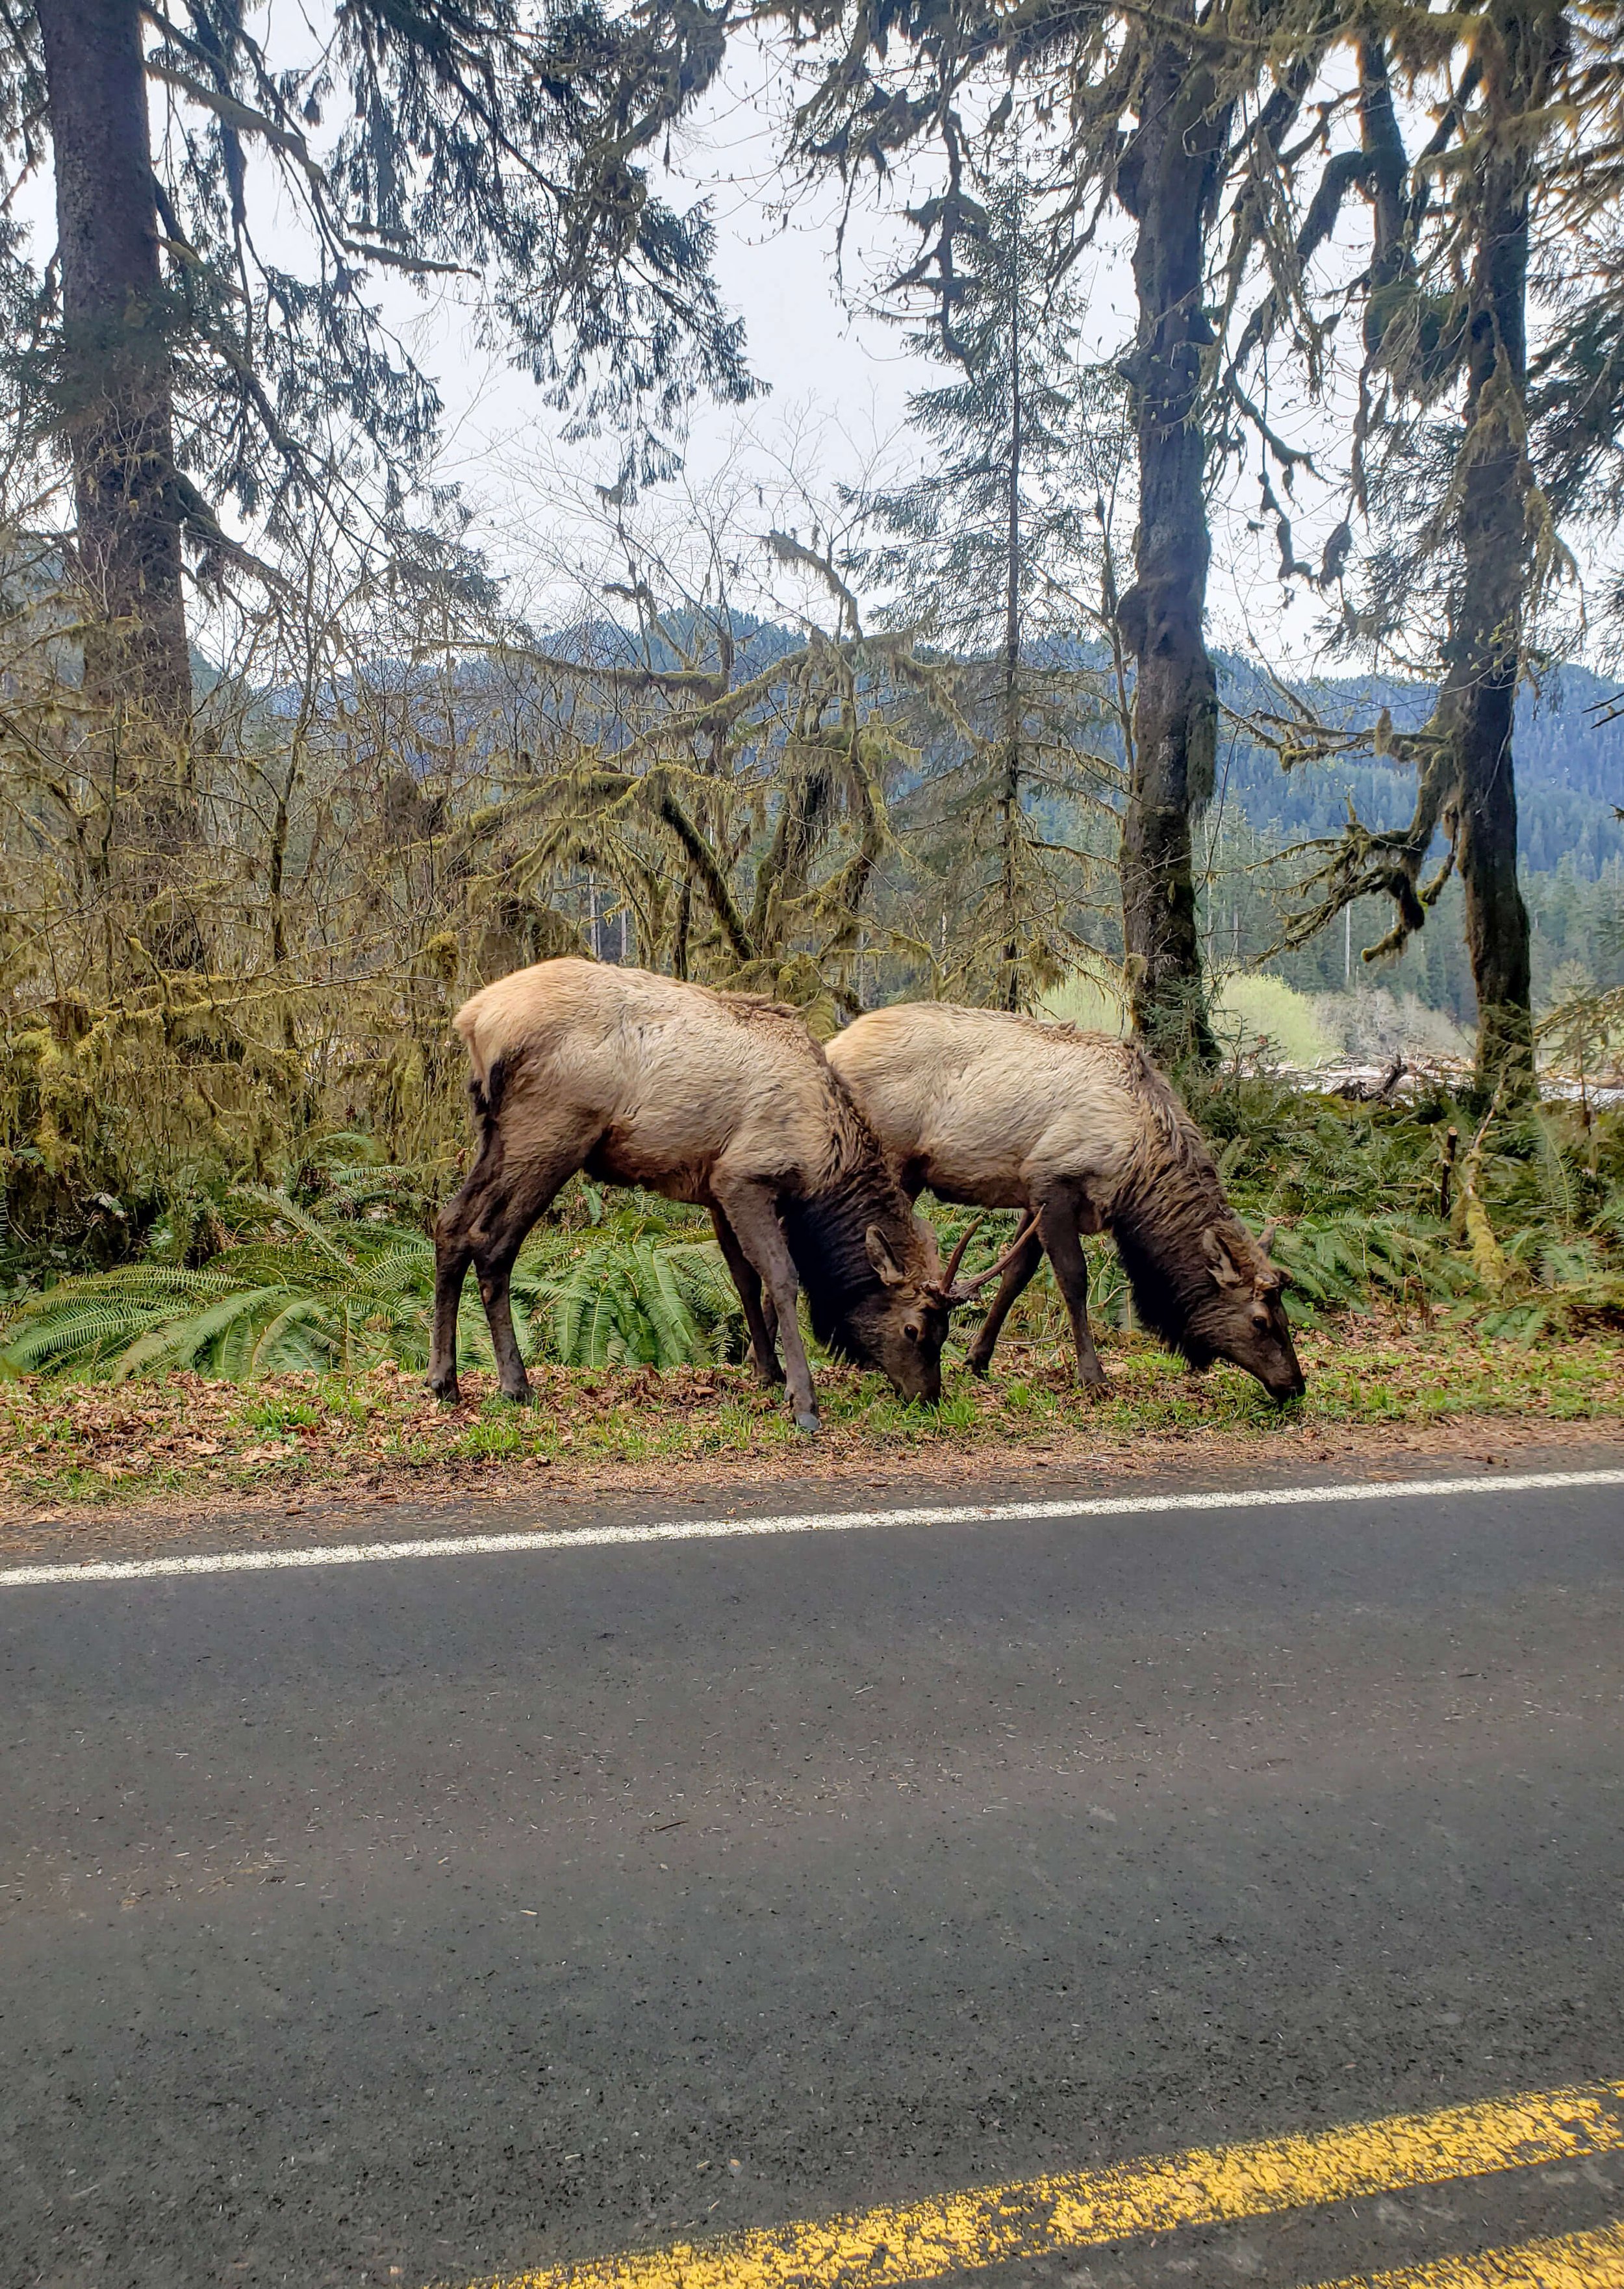 Elk at the Hoh Rainforest in Washington